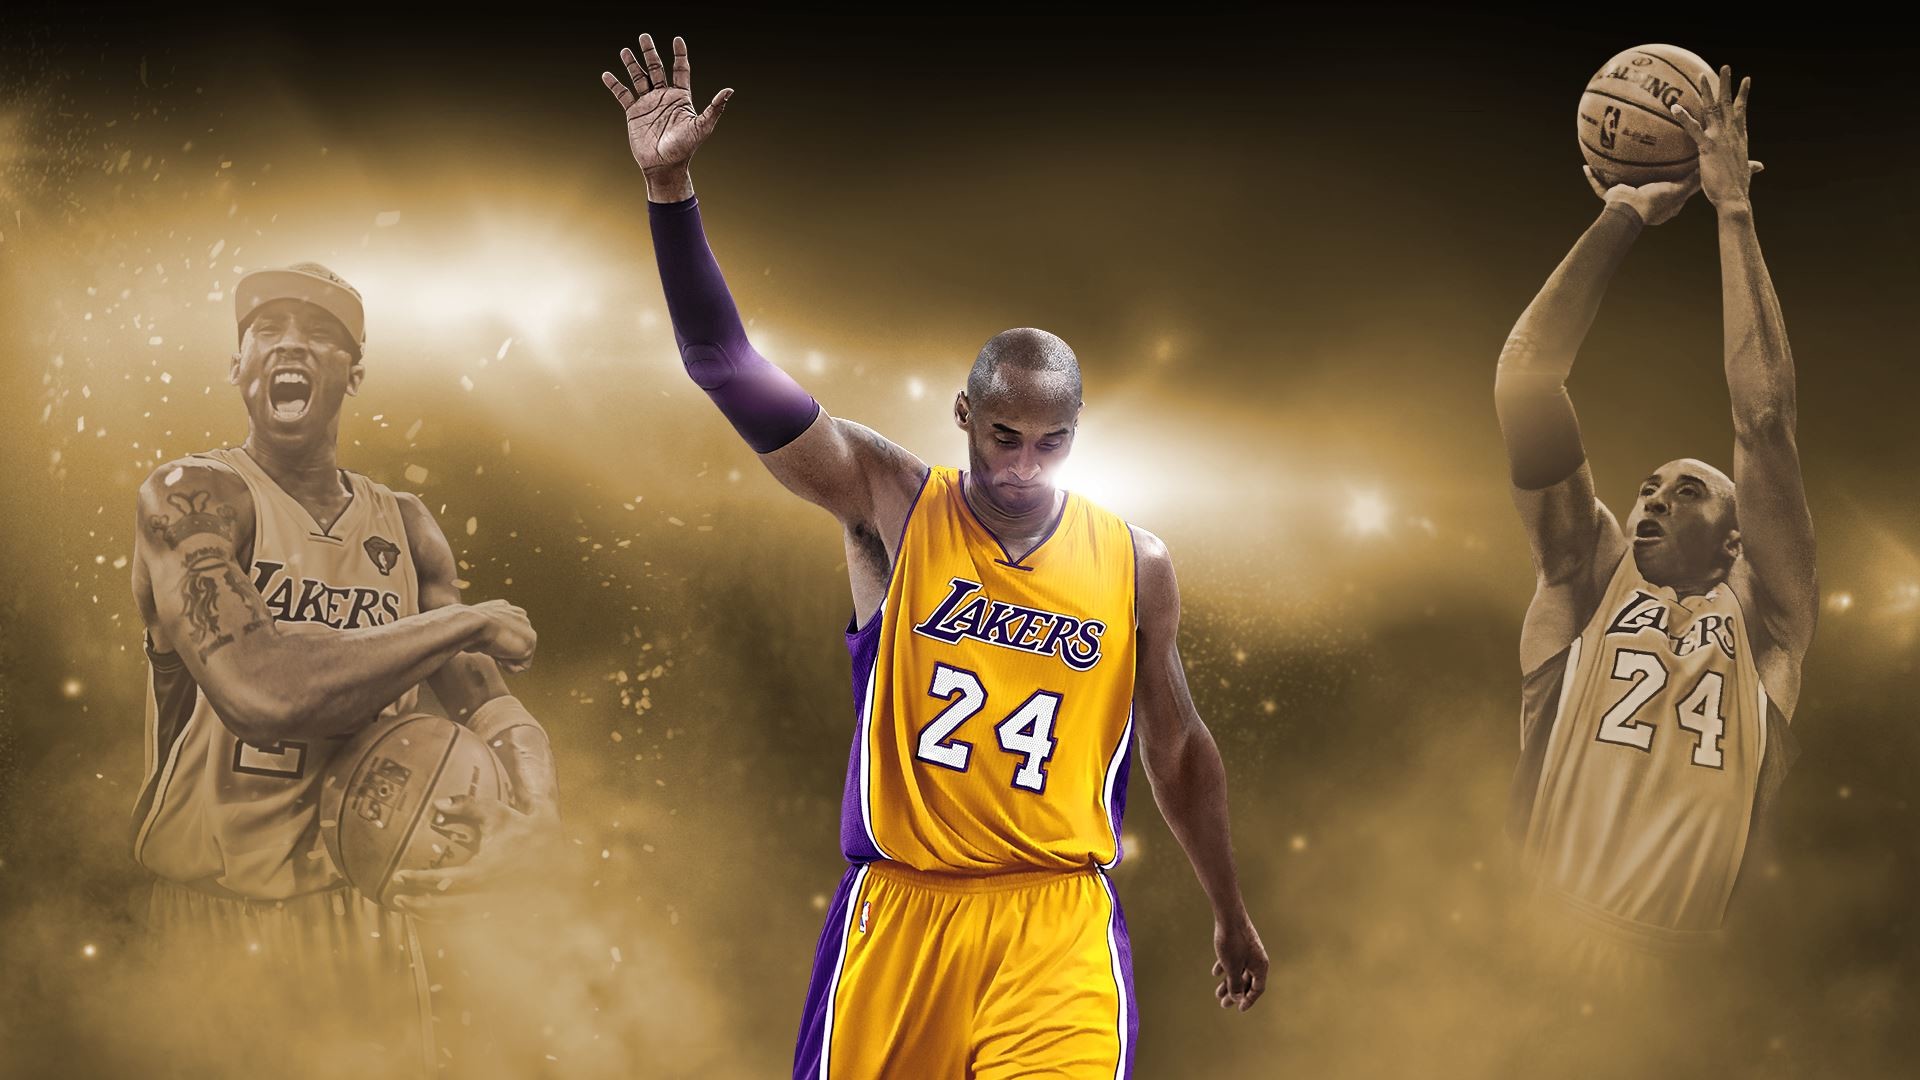 1920x1080 NBA-basketball-of-the-biggest-events-and-best-